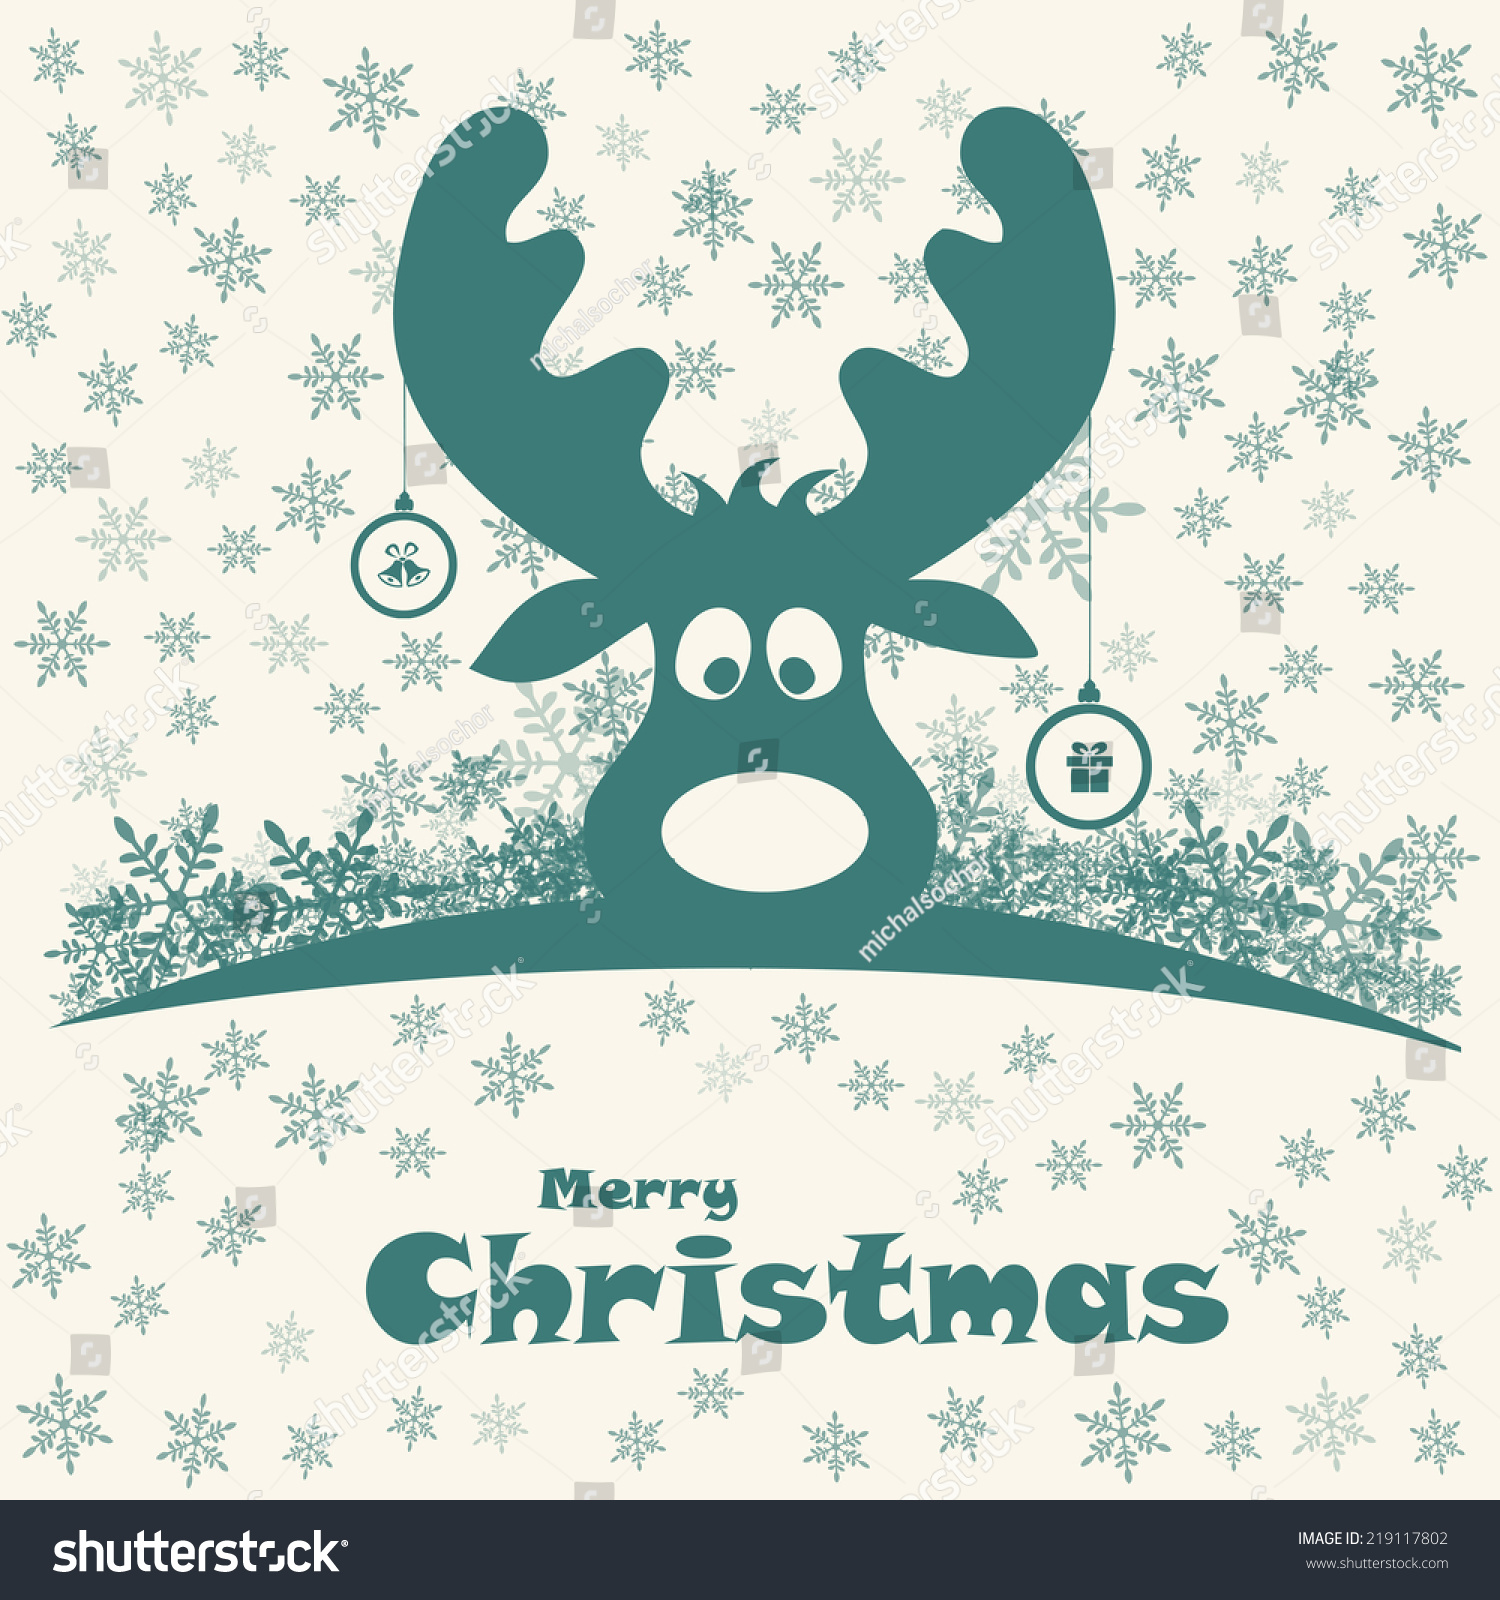 Christmas Illustration With Funny Deer, Vector - 219117802 : Shutterstock